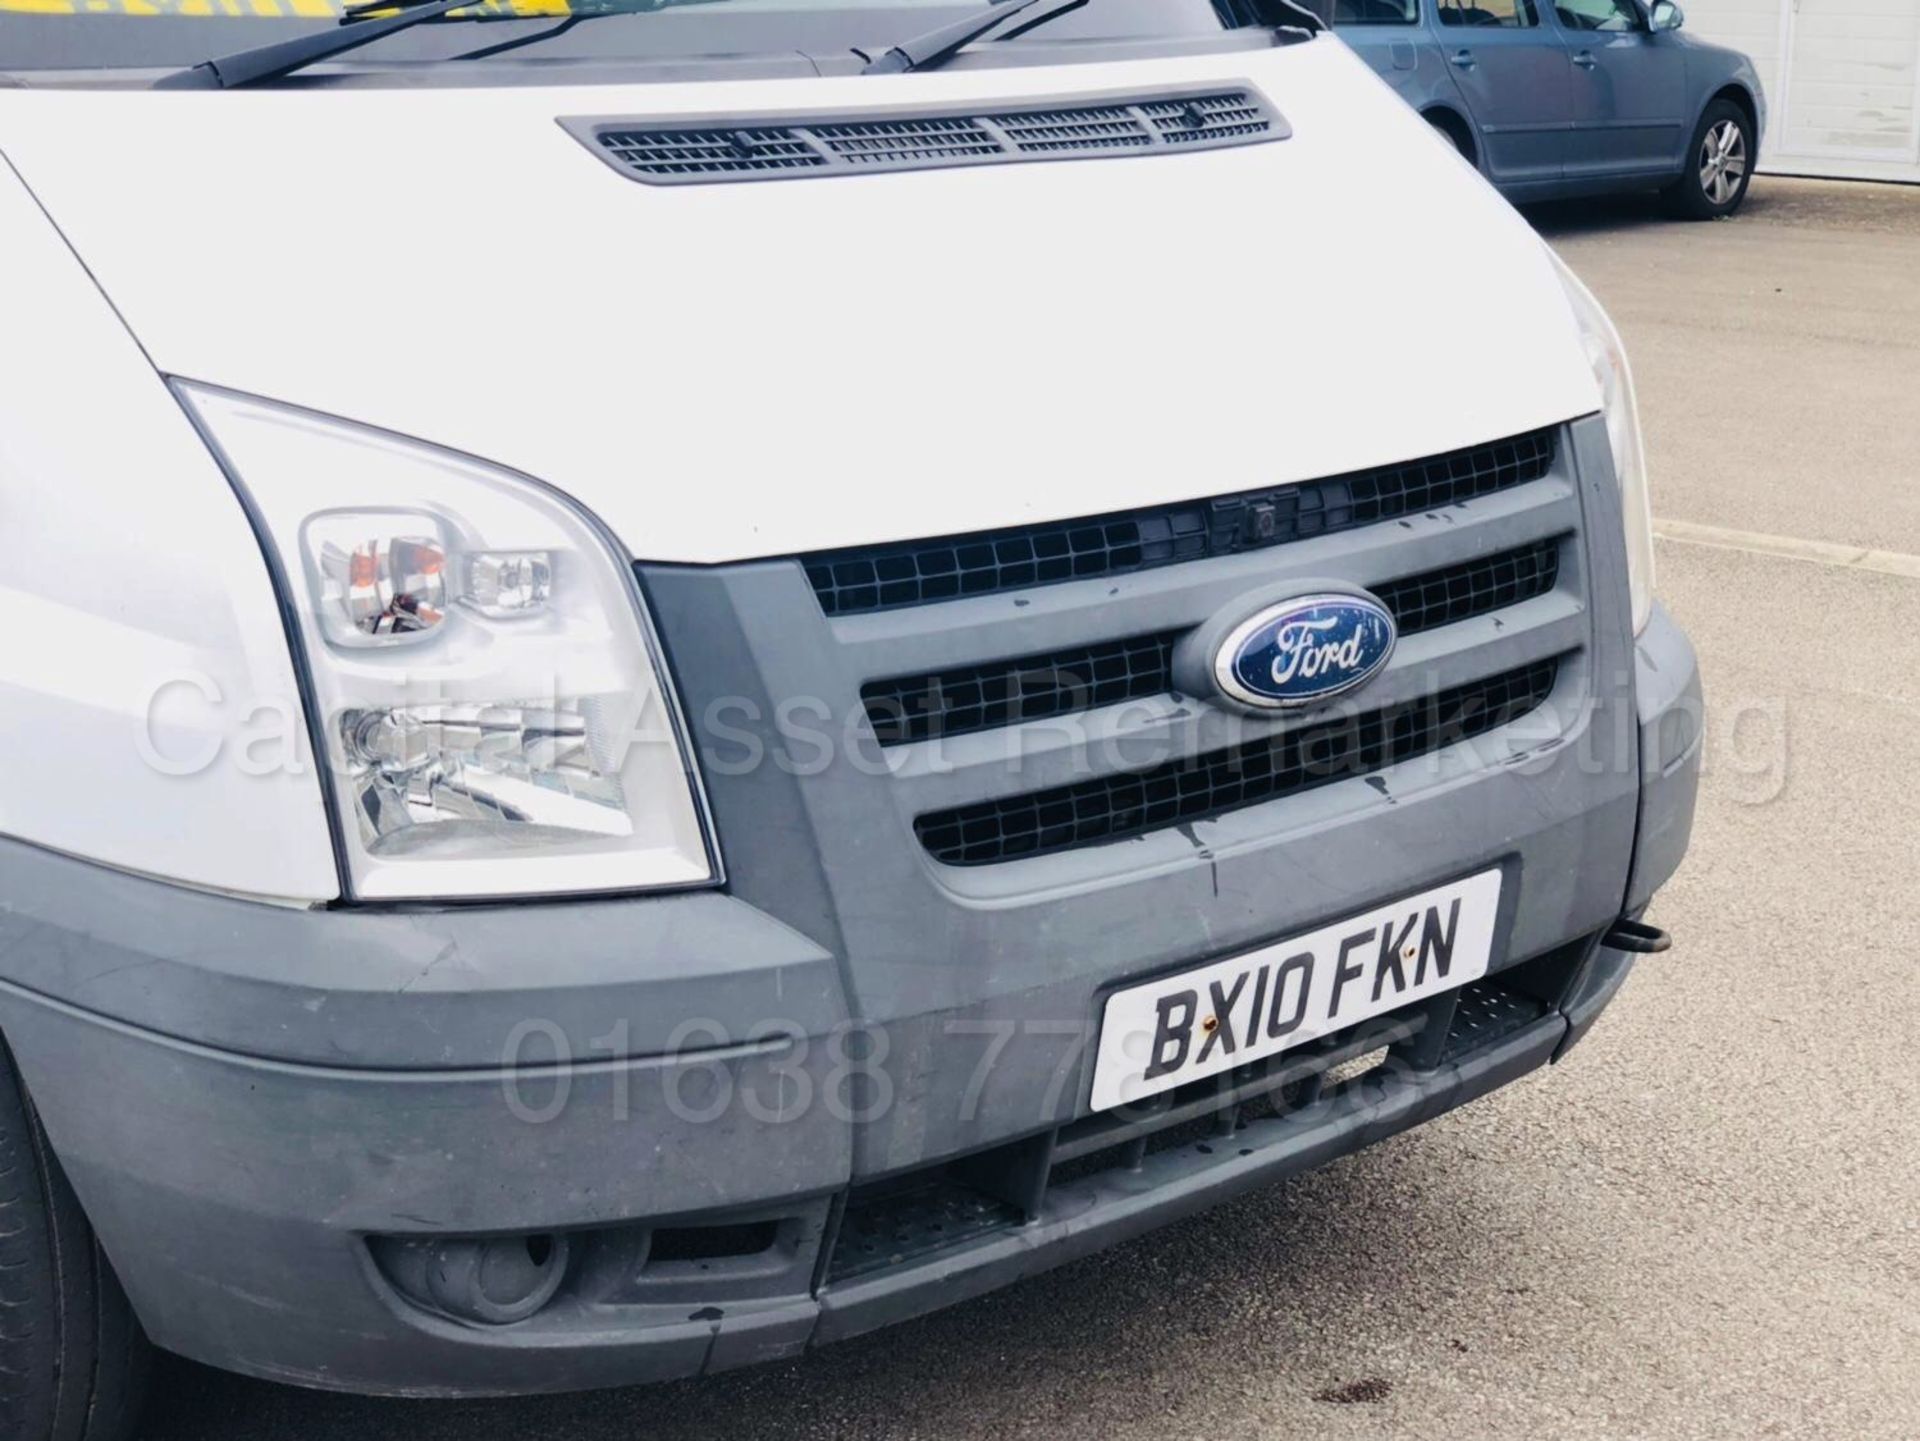 (On Sale) FORD TRANSIT 100 350 'BOX / LUTON VAN' (2010) '2.4 TDCI - 100 BHP' (1 COMPANY OWNER) - Image 19 of 29